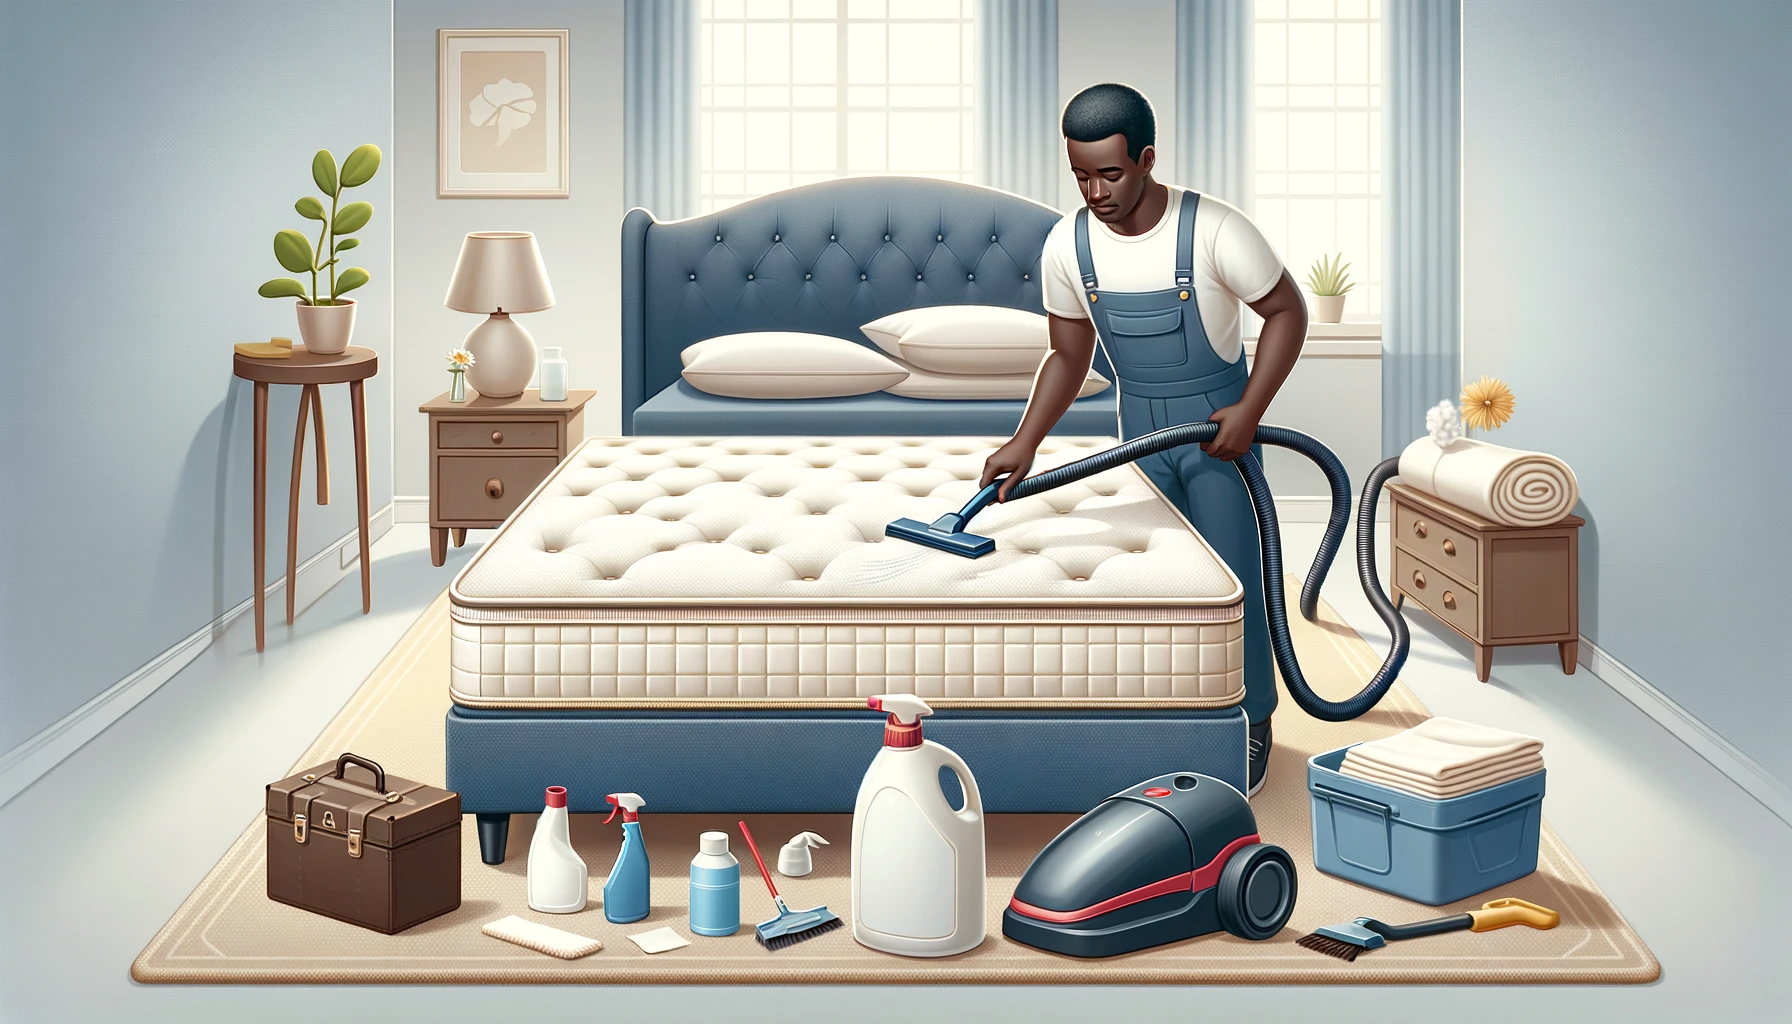 An image depicting the care and maintenance of a custom mattress in a home setting. The scene should include a person (a middle-aged Black man) gently vacuuming the mattress, demonstrating regular cleaning.